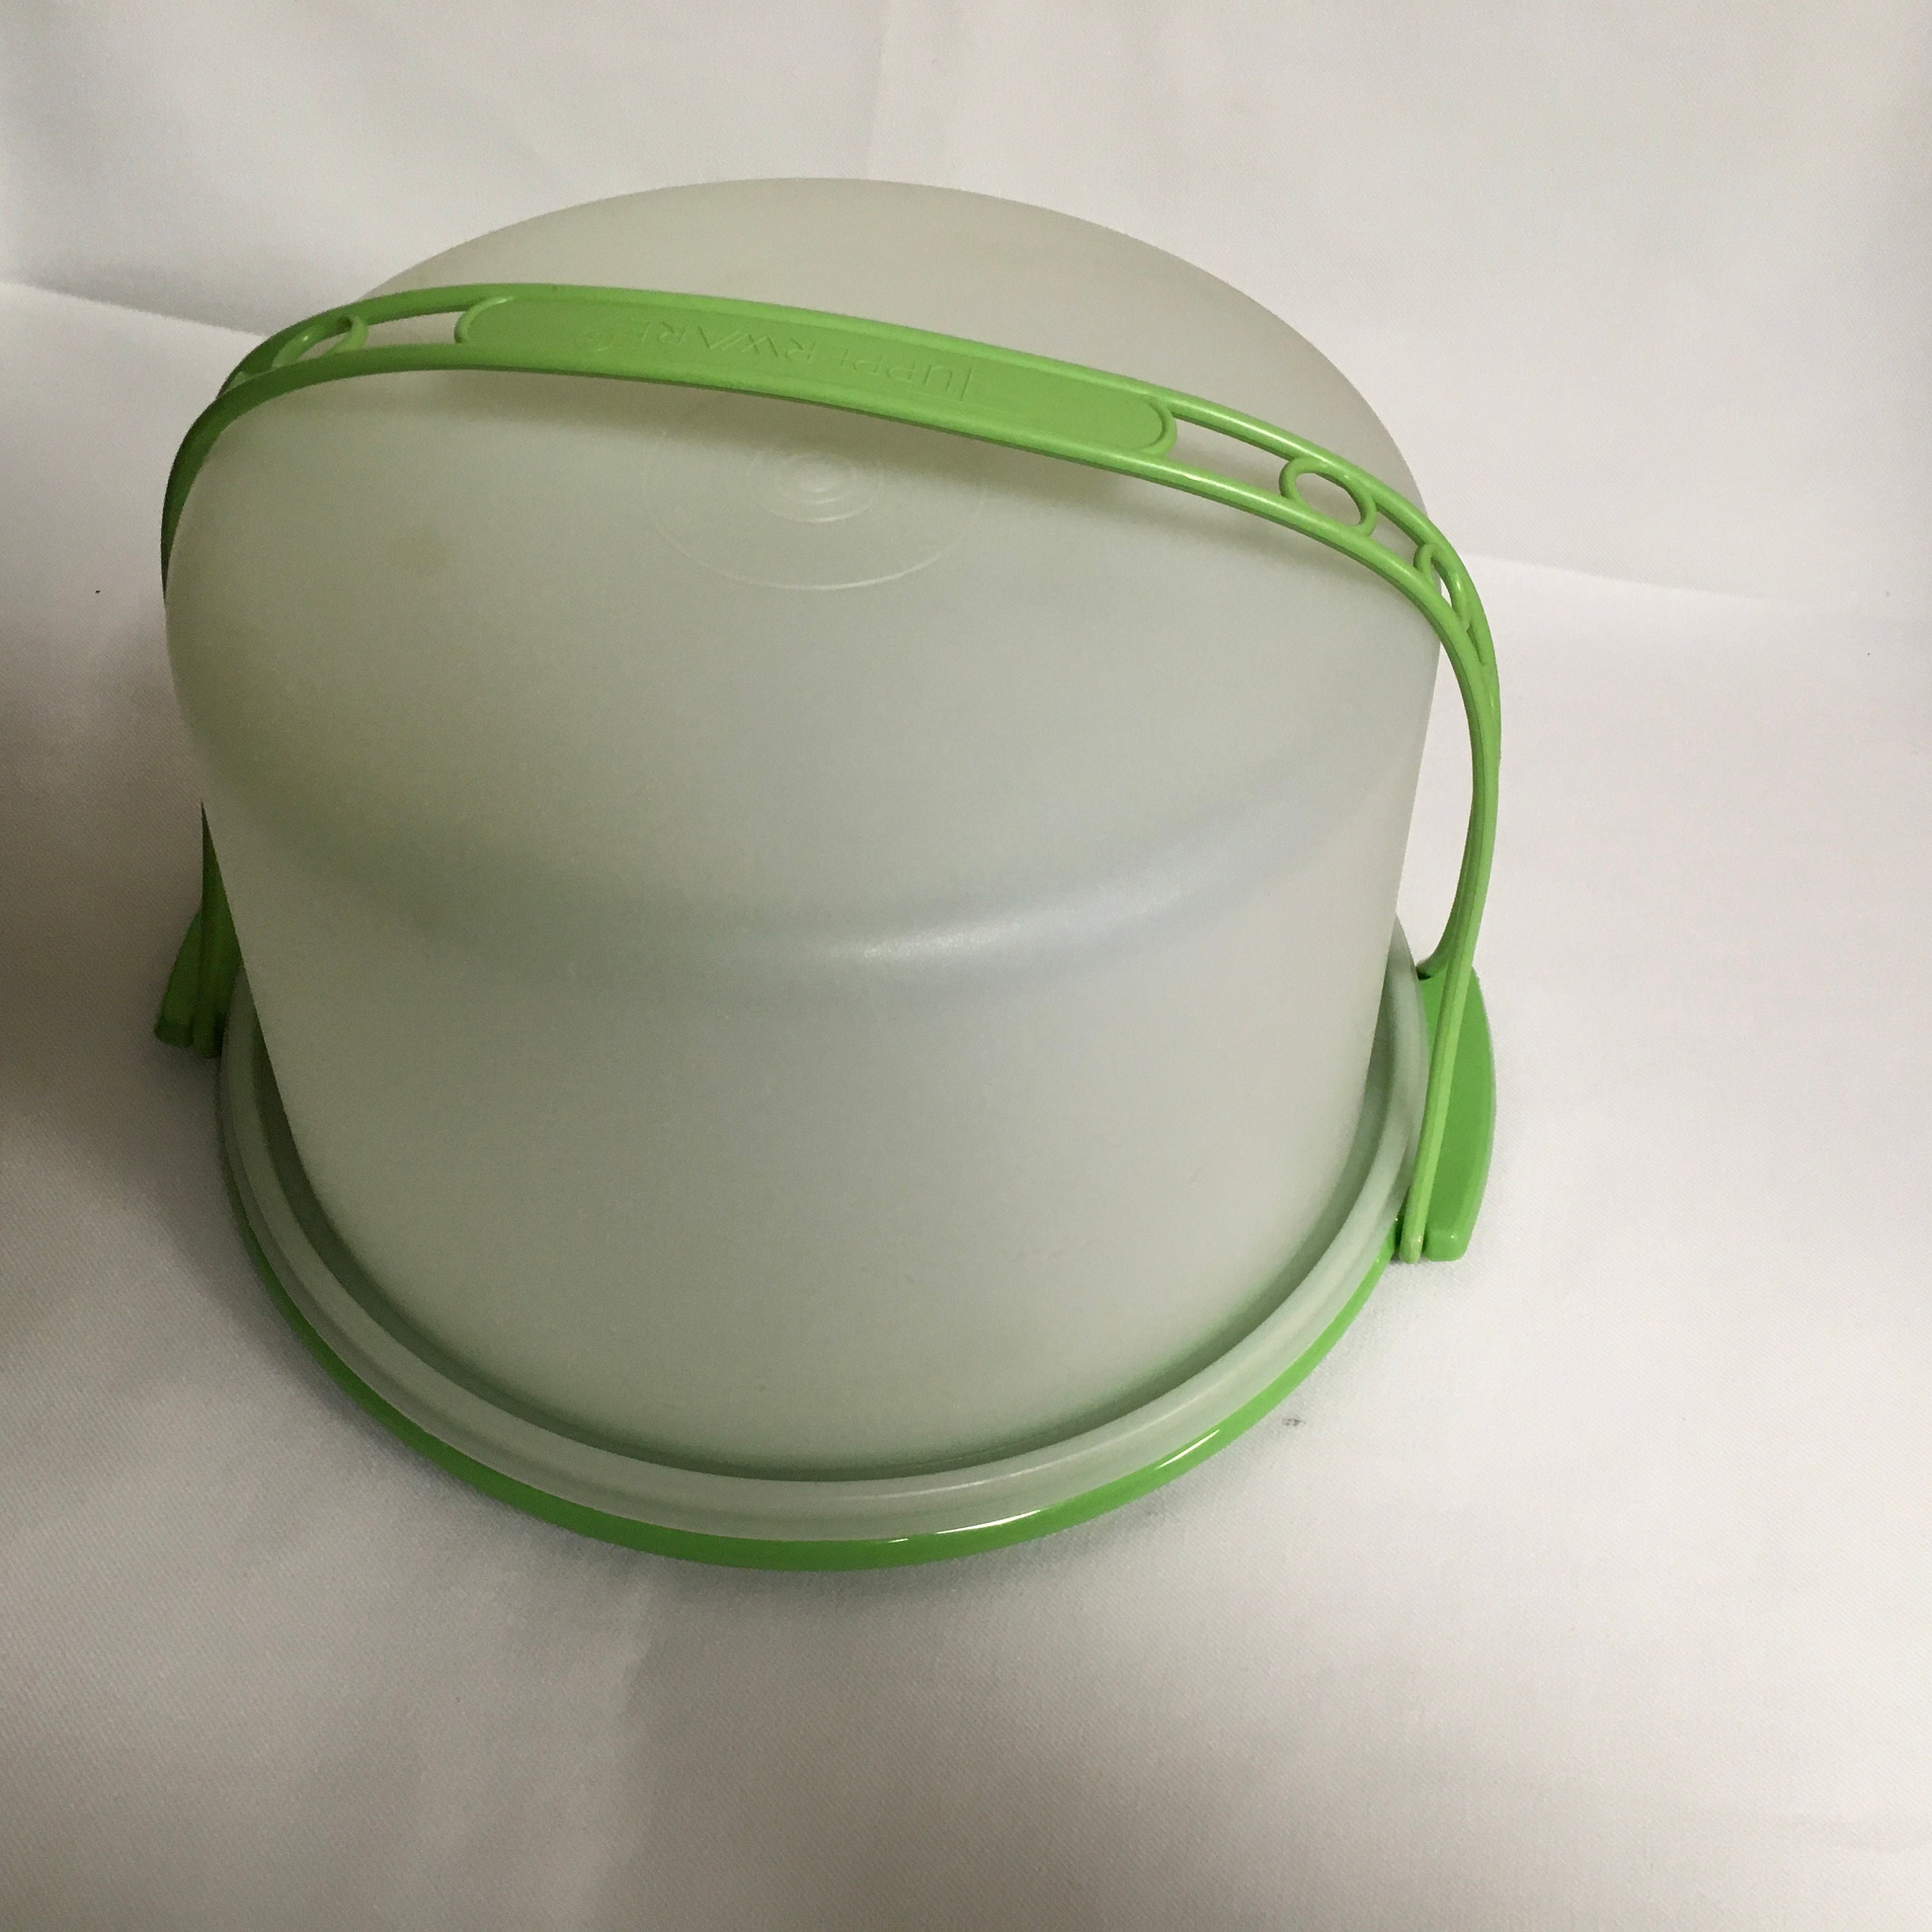 Vintage Tupperware Domed Cake Taker Carrier With Strap Handle Lime Green  70s Retro Kitchen Baking Center Decor Movie Prop Food Styling -  Denmark